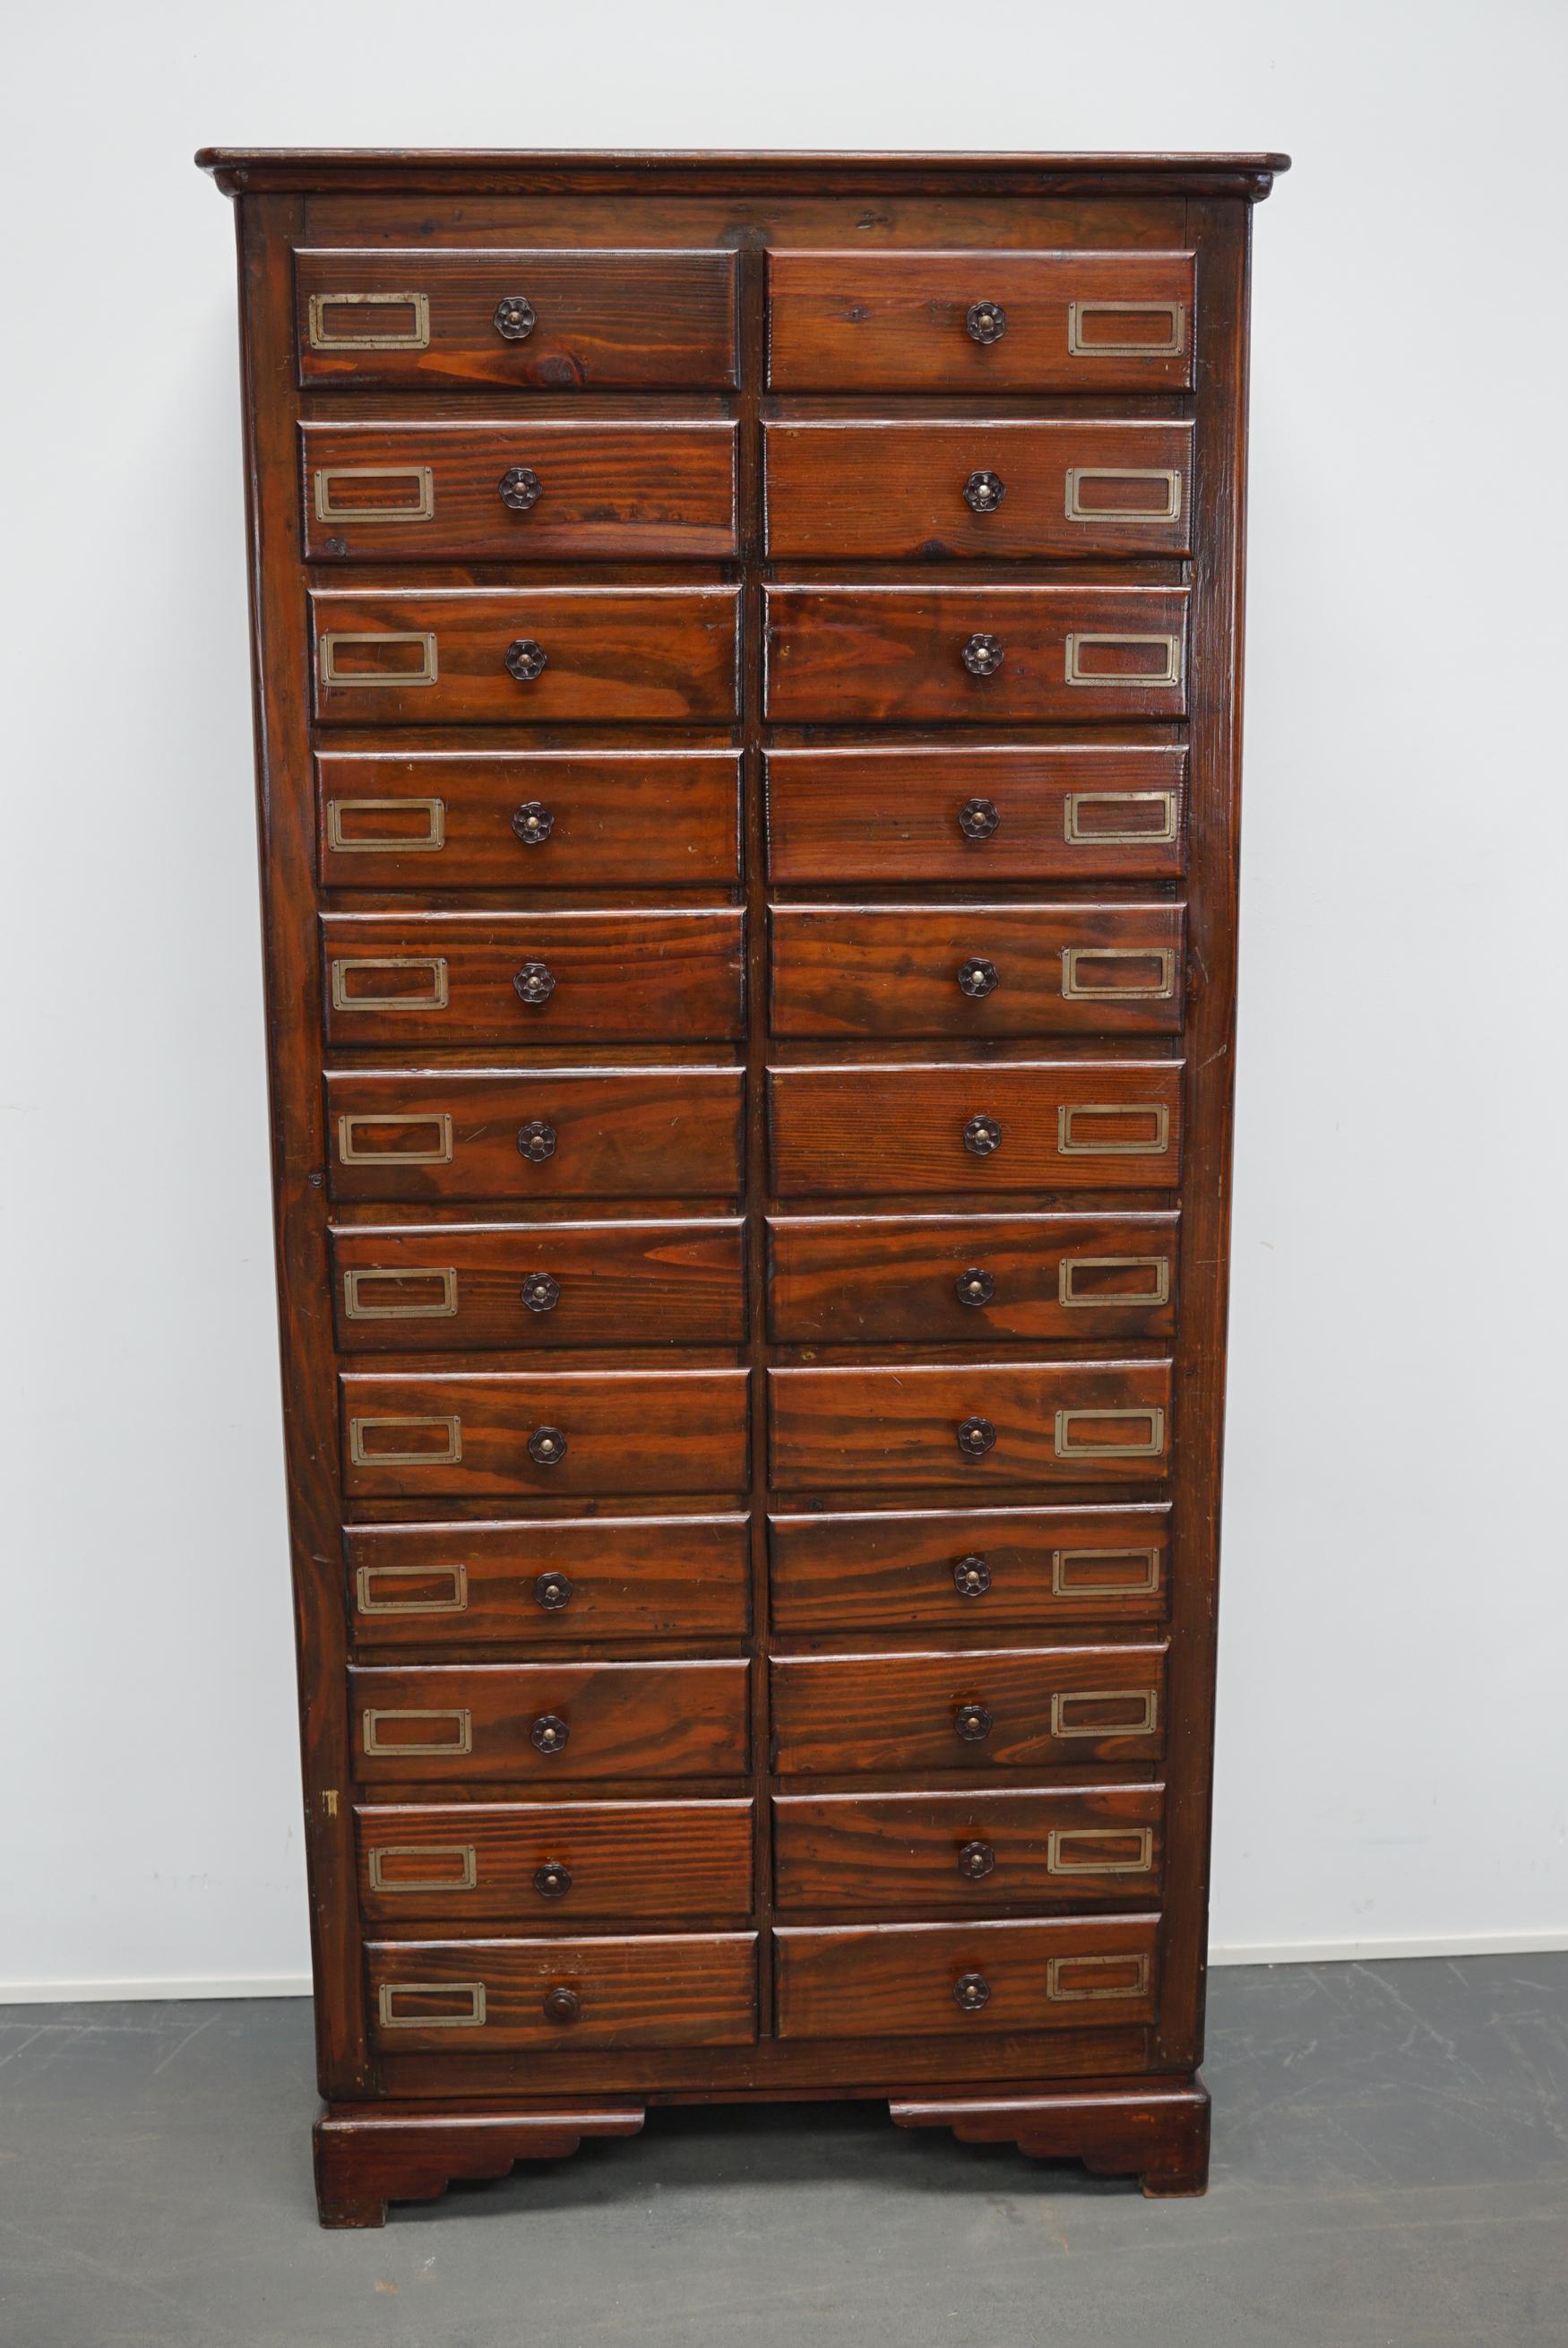 This apothecary cabinet of drawers was designed, circa 1950s in France. The piece is made from pine and features 24 drawers with bakelite hardware. The interior dimensions of the drawers are: D 37 x W 29 x H 8.5 cm. 
 